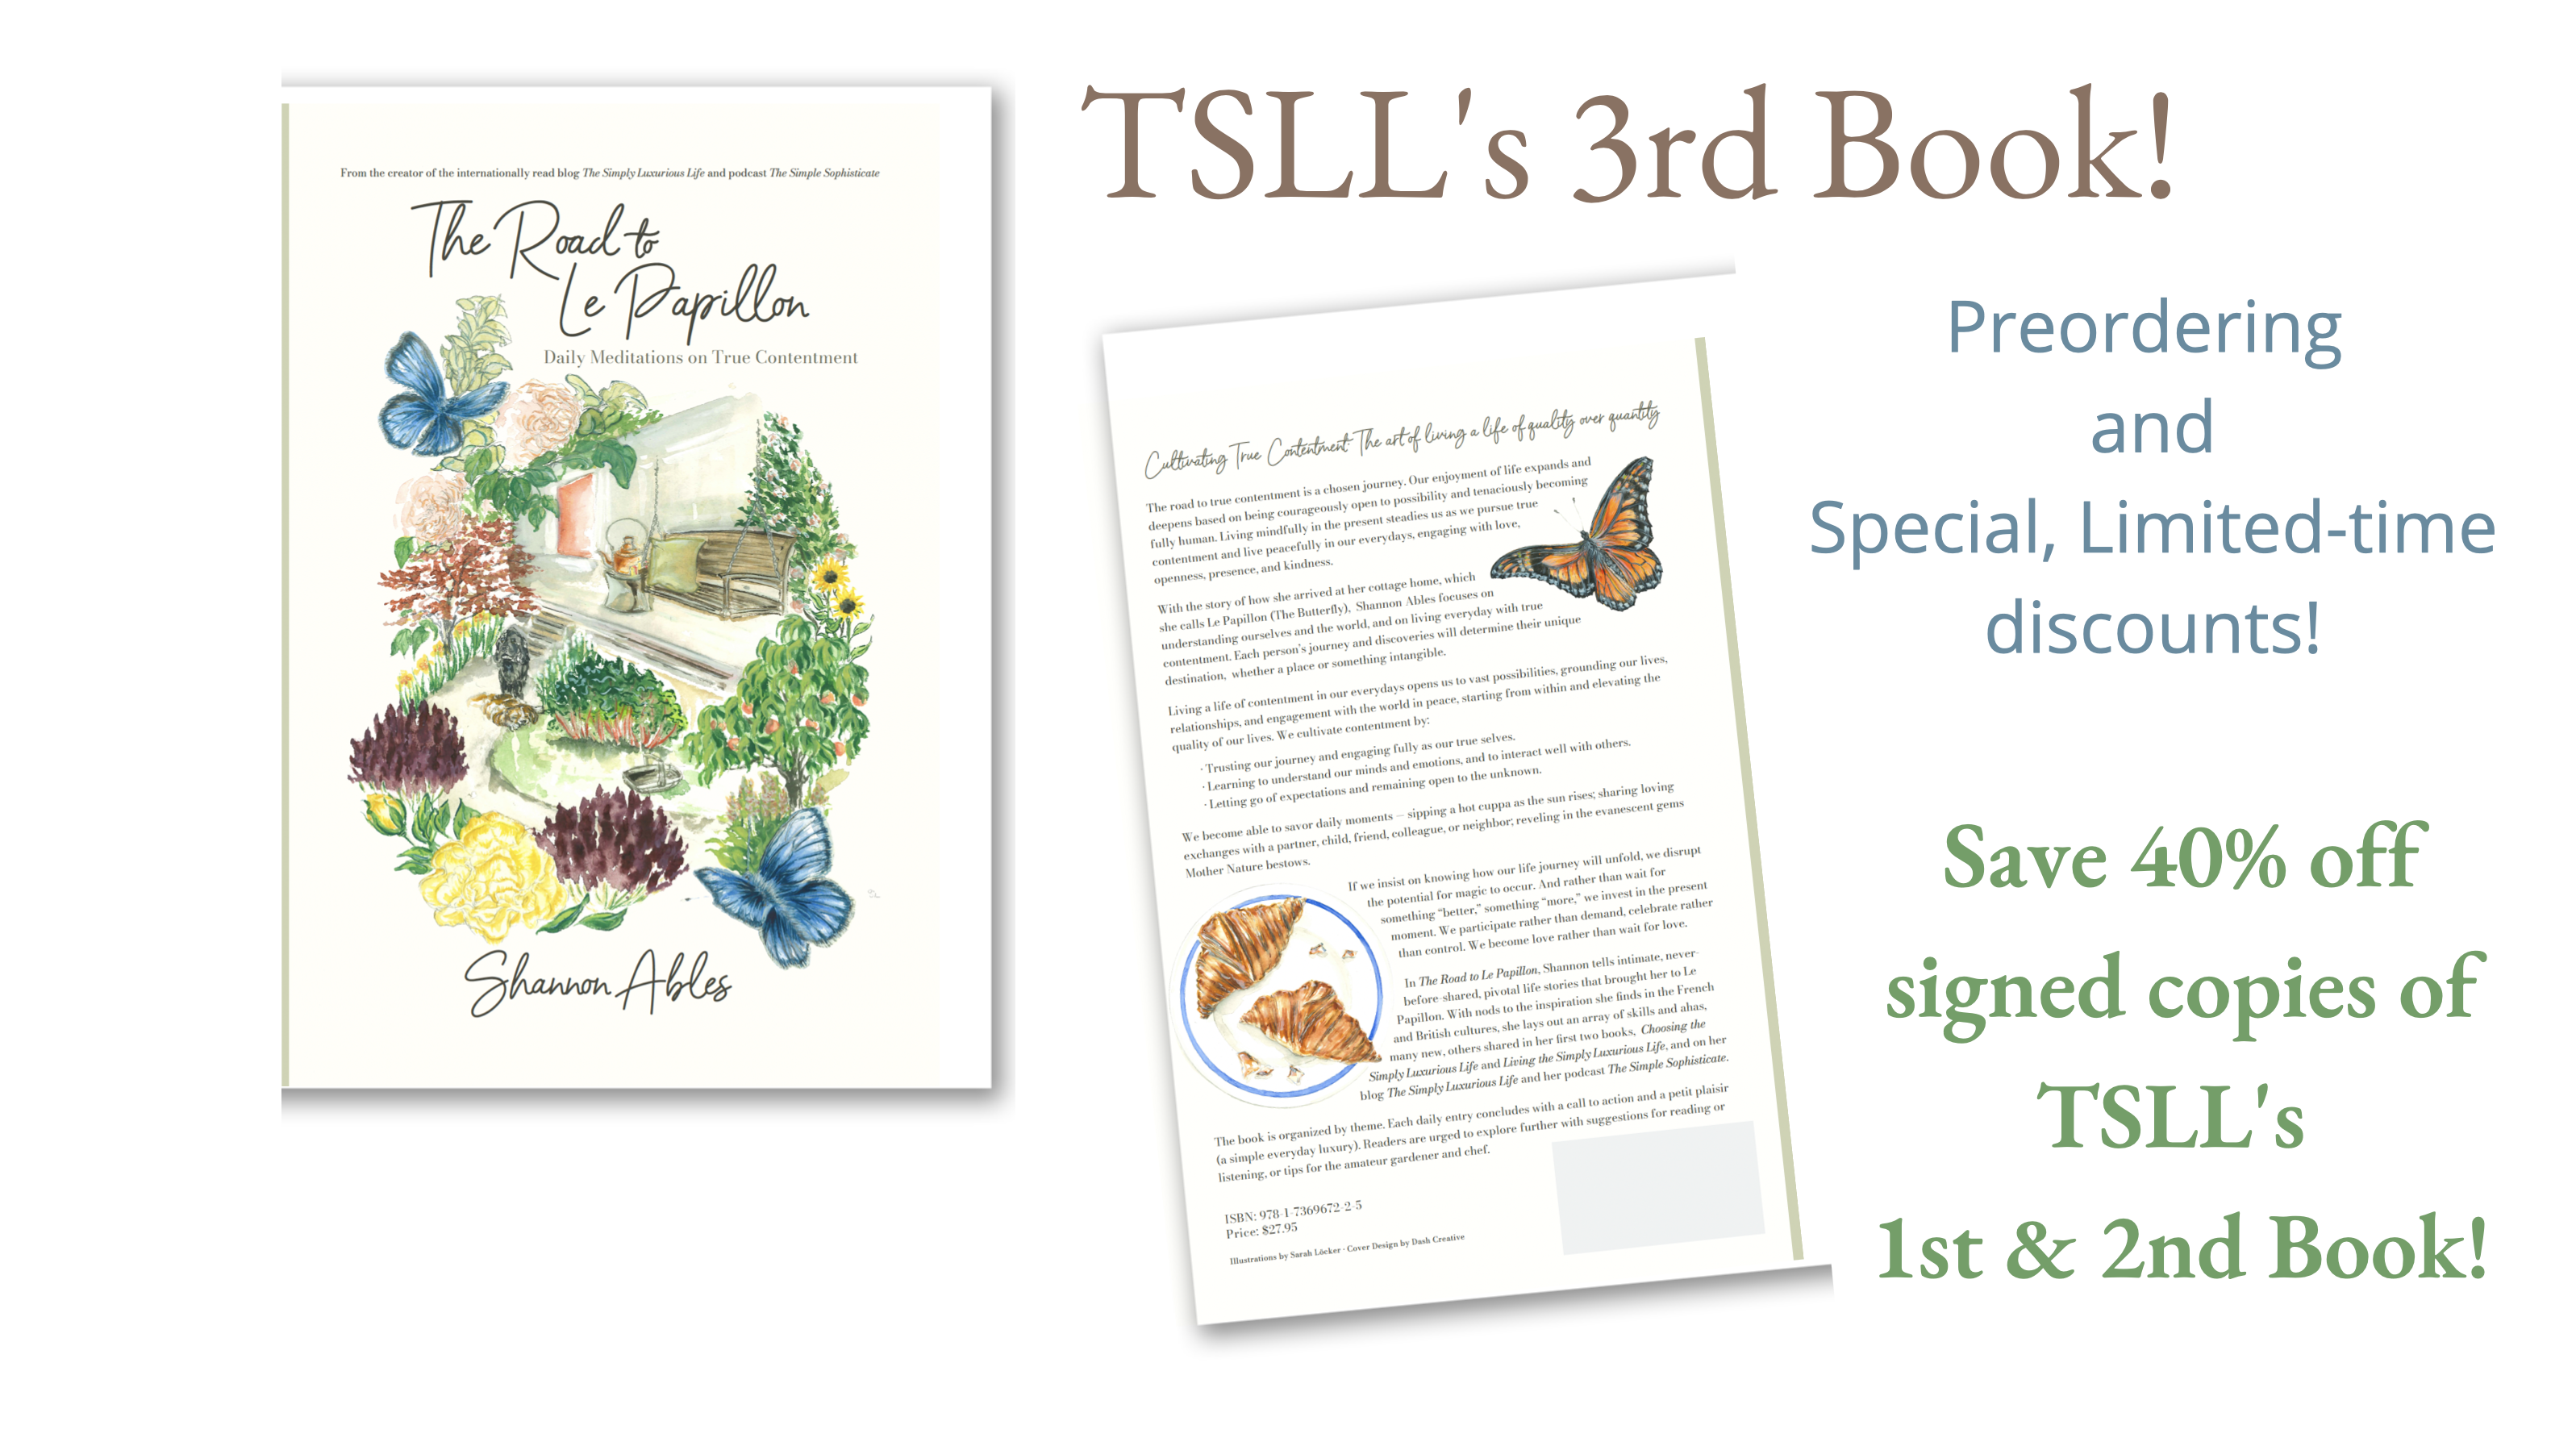 Preordering Signed Copies of TSLL’s 3rd Book & A Special Sale on Previous Books